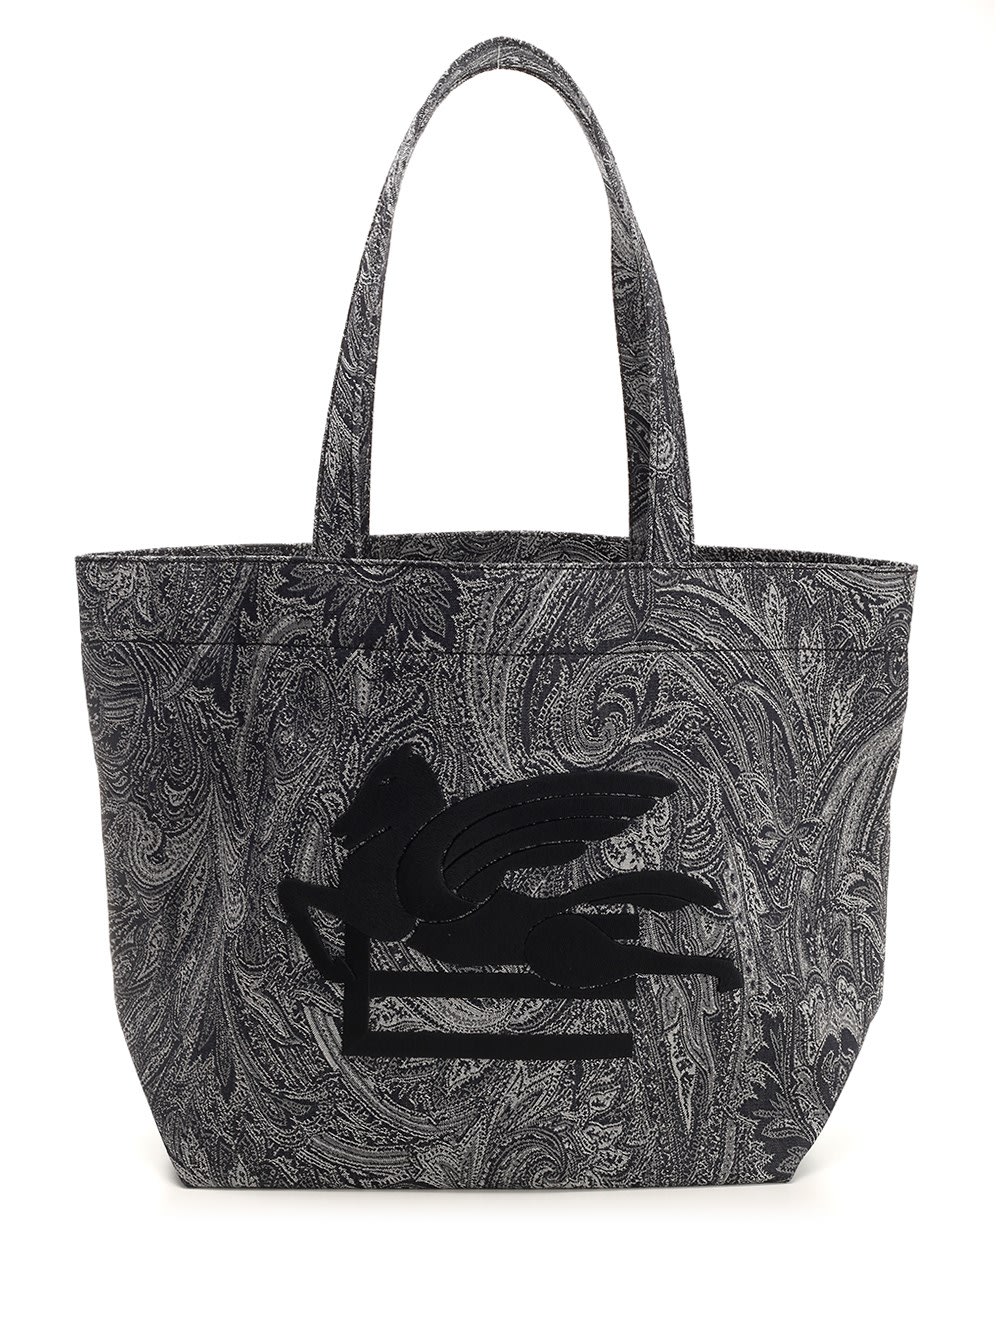 Navy Blue Large Tote Bag With Paisley Jacquard Motif